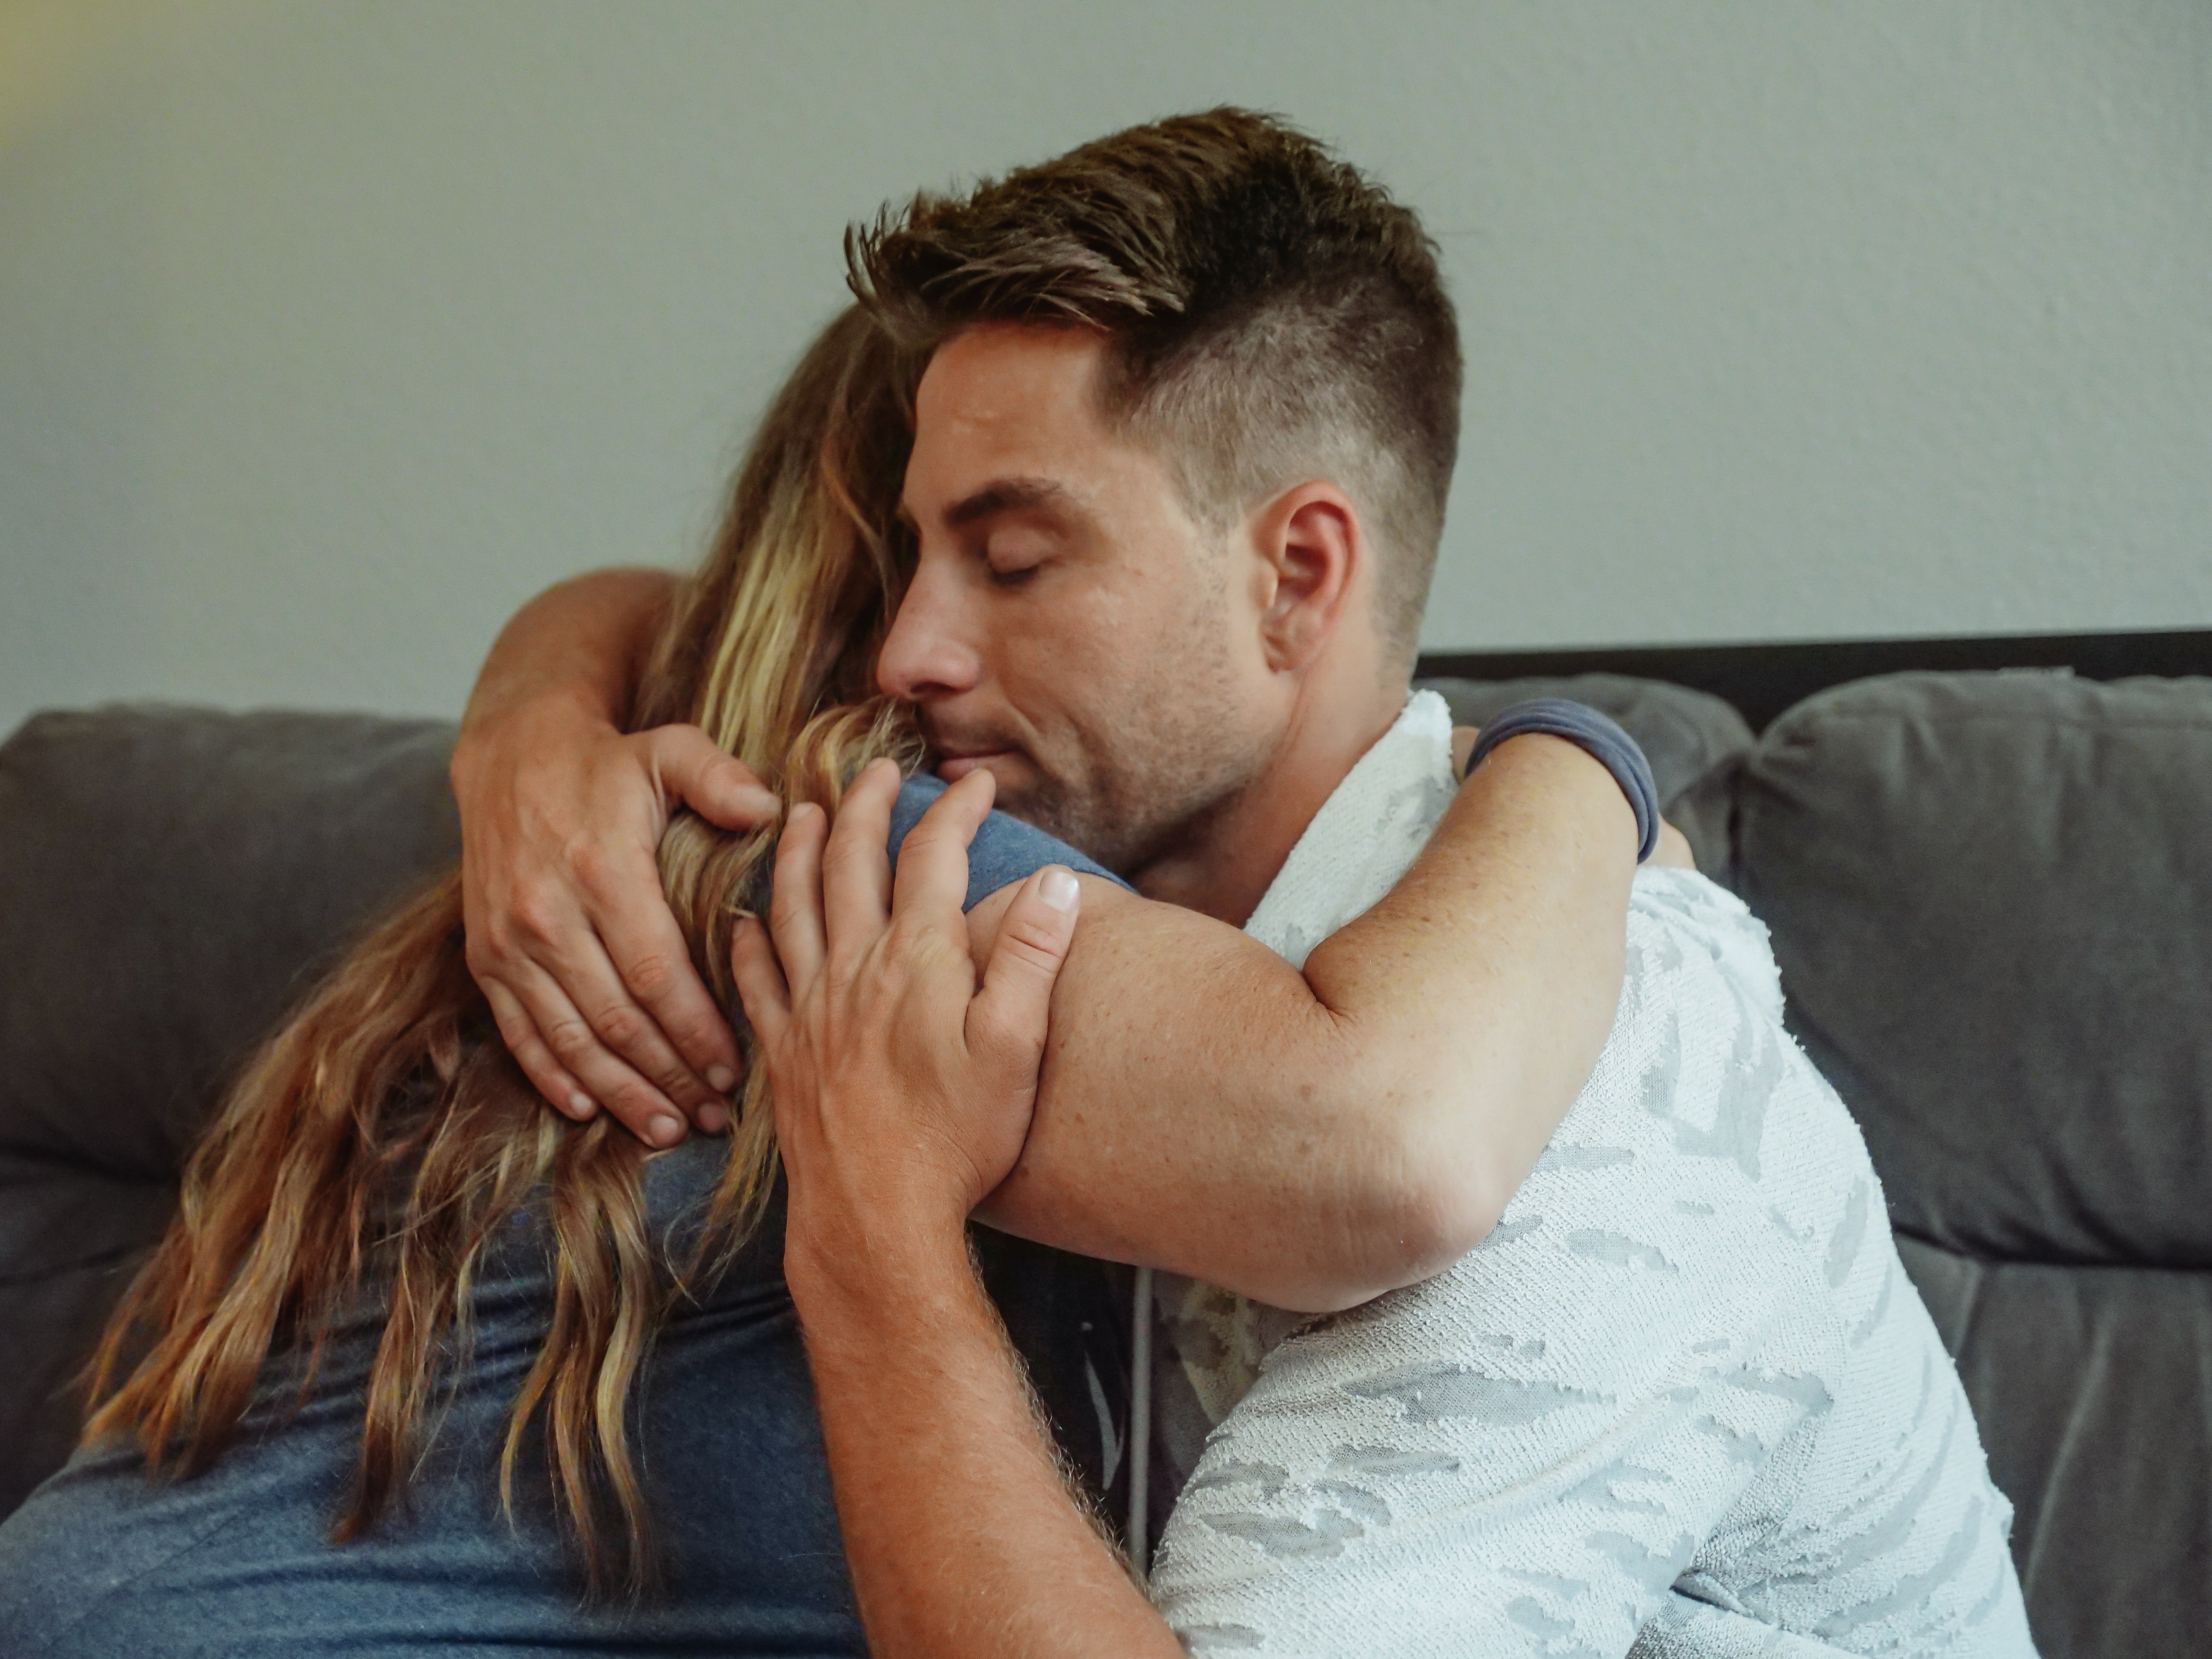 Mia spun around very fast at the sound of her son's voice, and before he said anything, she launched herself into his arms | Source: Pexels